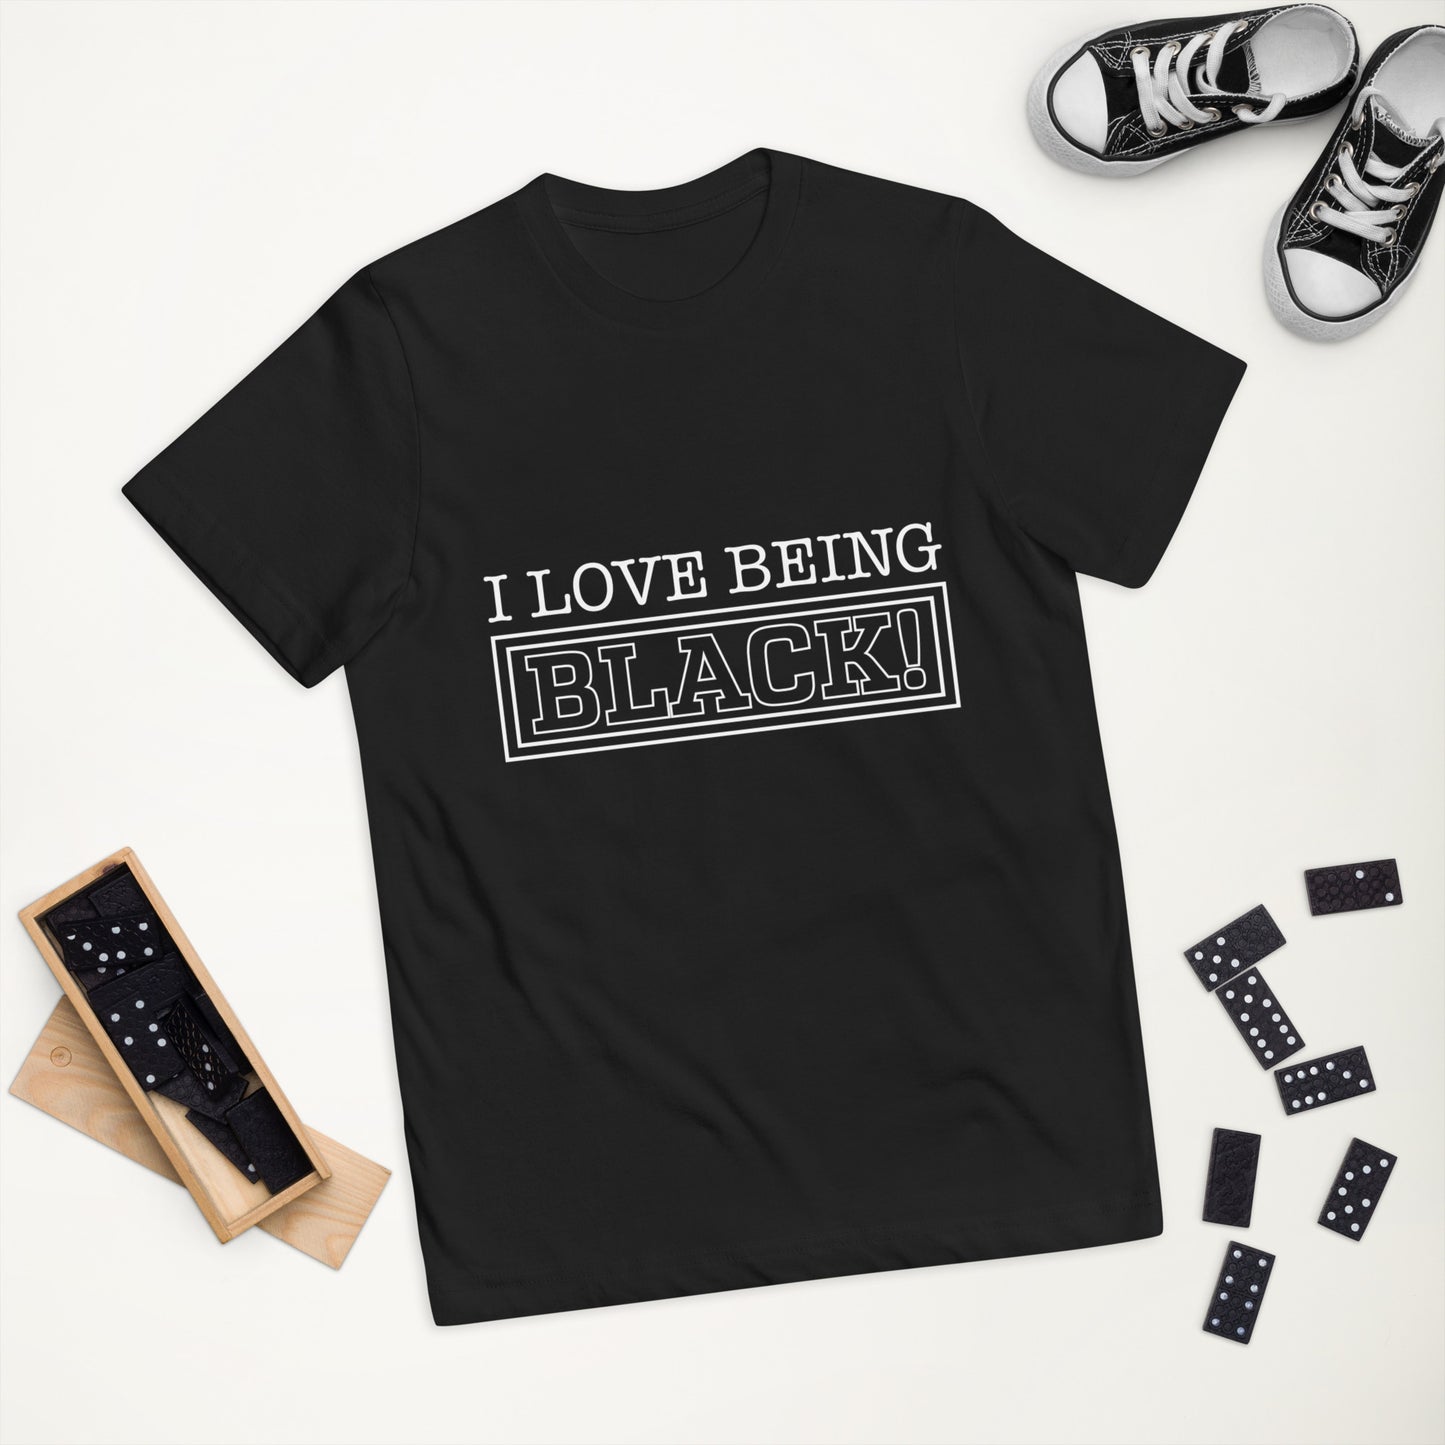 I Love Being Black Youth t-shirts